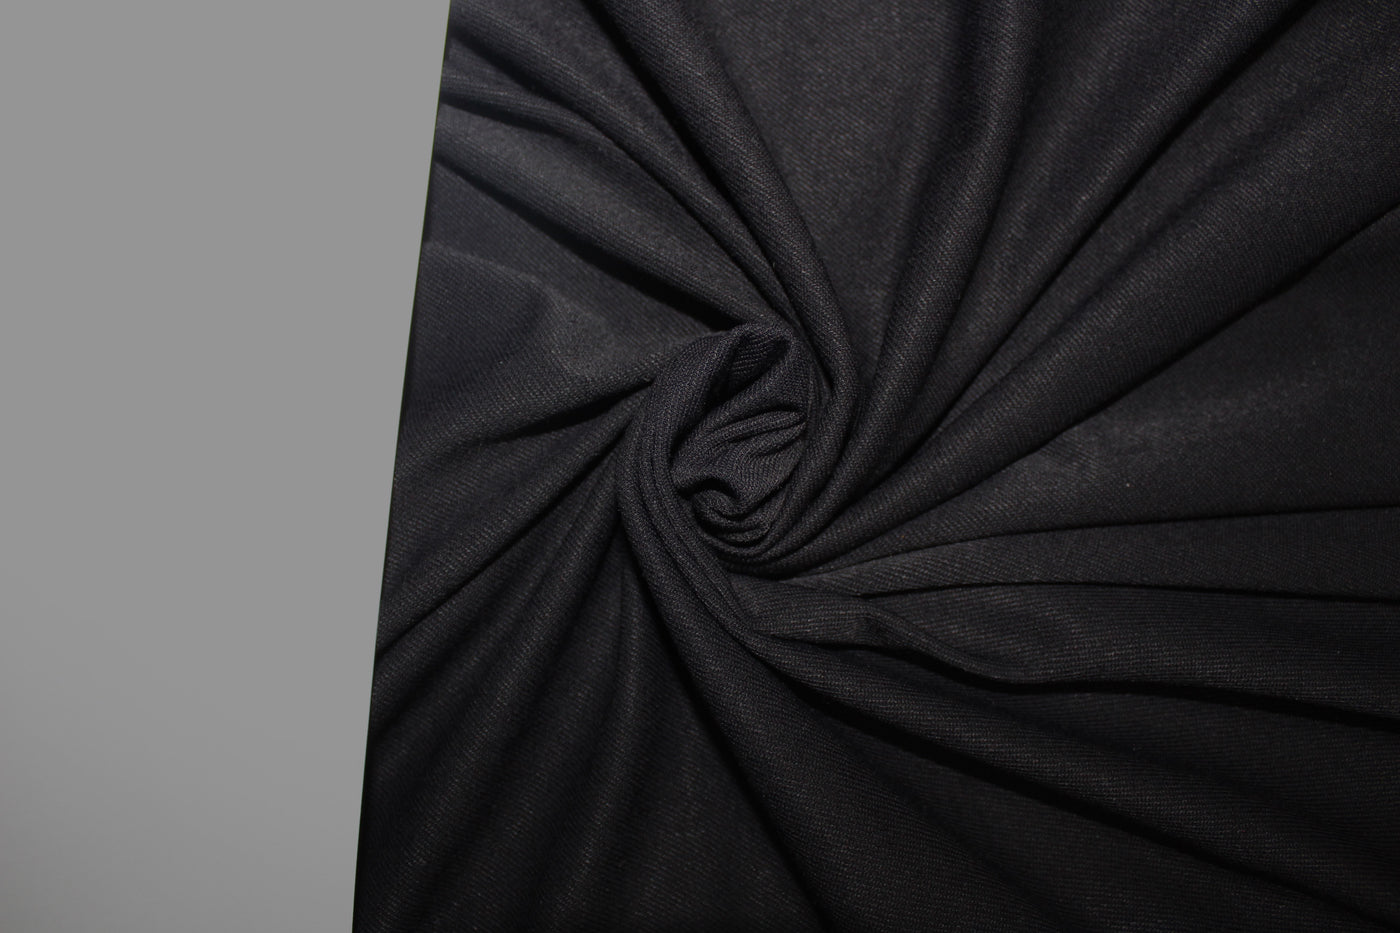 Tencel Knitted Jersey Fabric [300 grams per meter] 80" wide available in 5 COLORS white / black / navy/ charcoal/wine